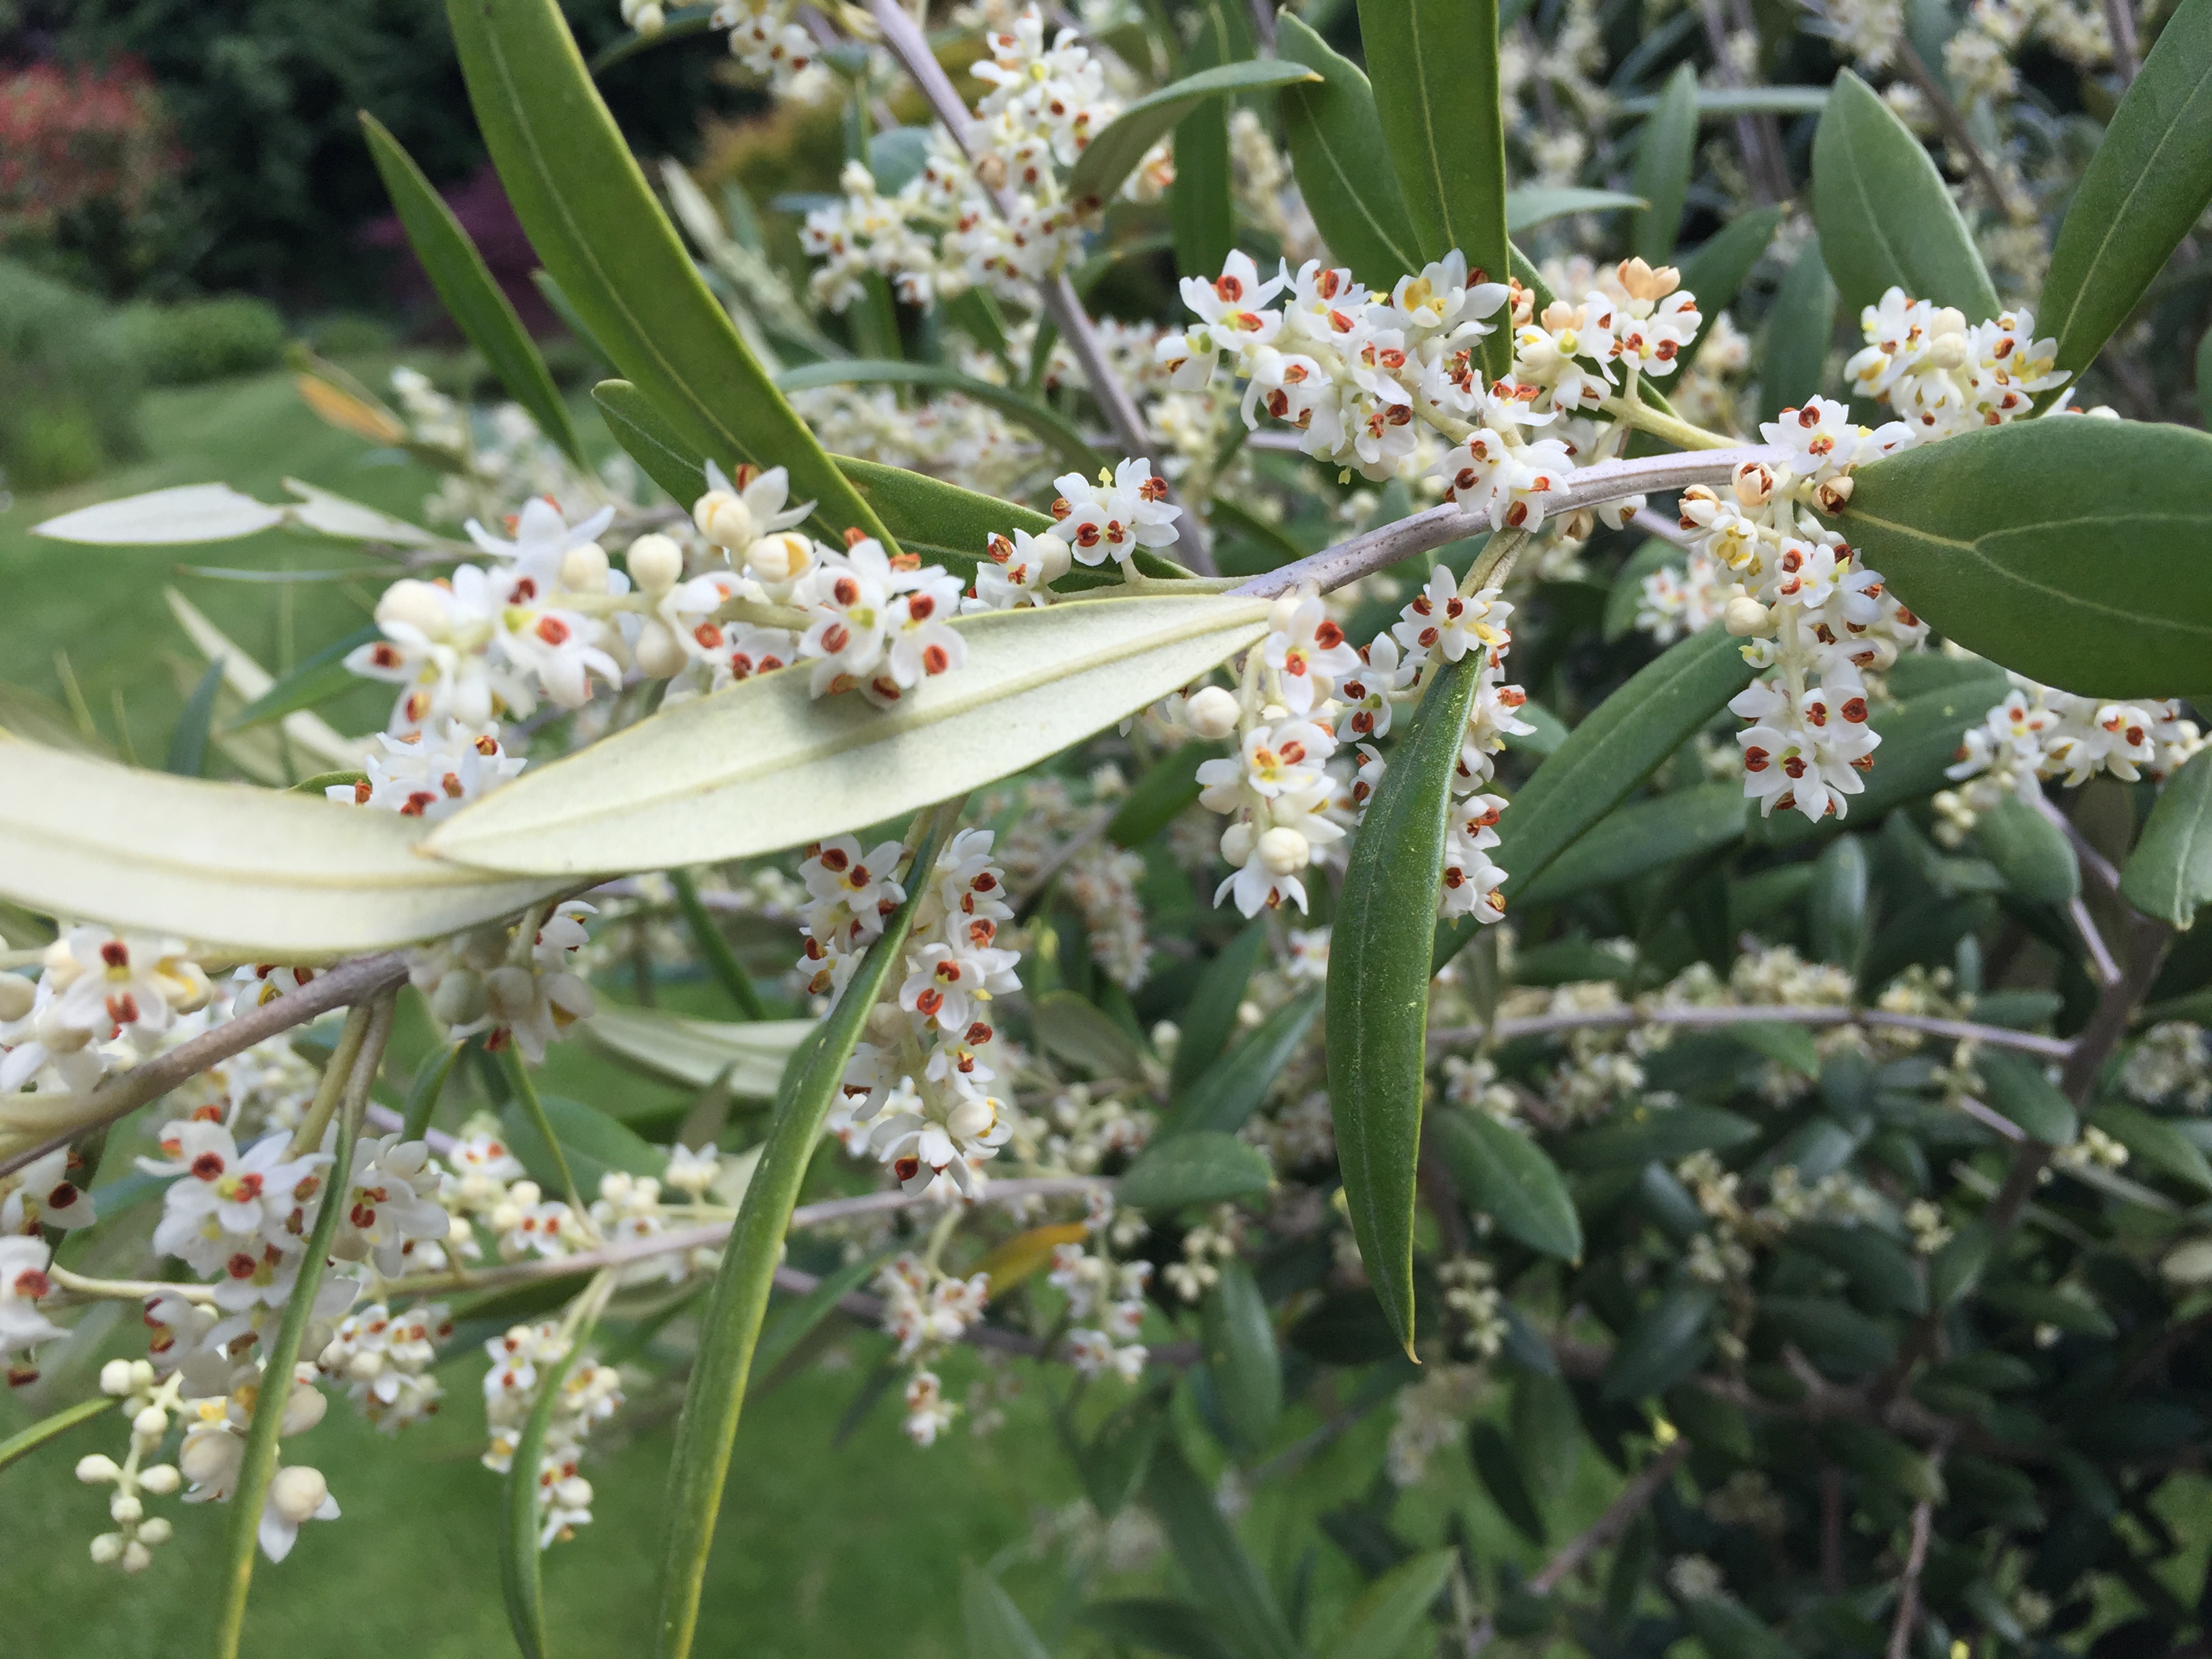 Olive tree flowers - wind or insect pollinated? - Page 1 - Homes, Gardens and DIY - PistonHeads